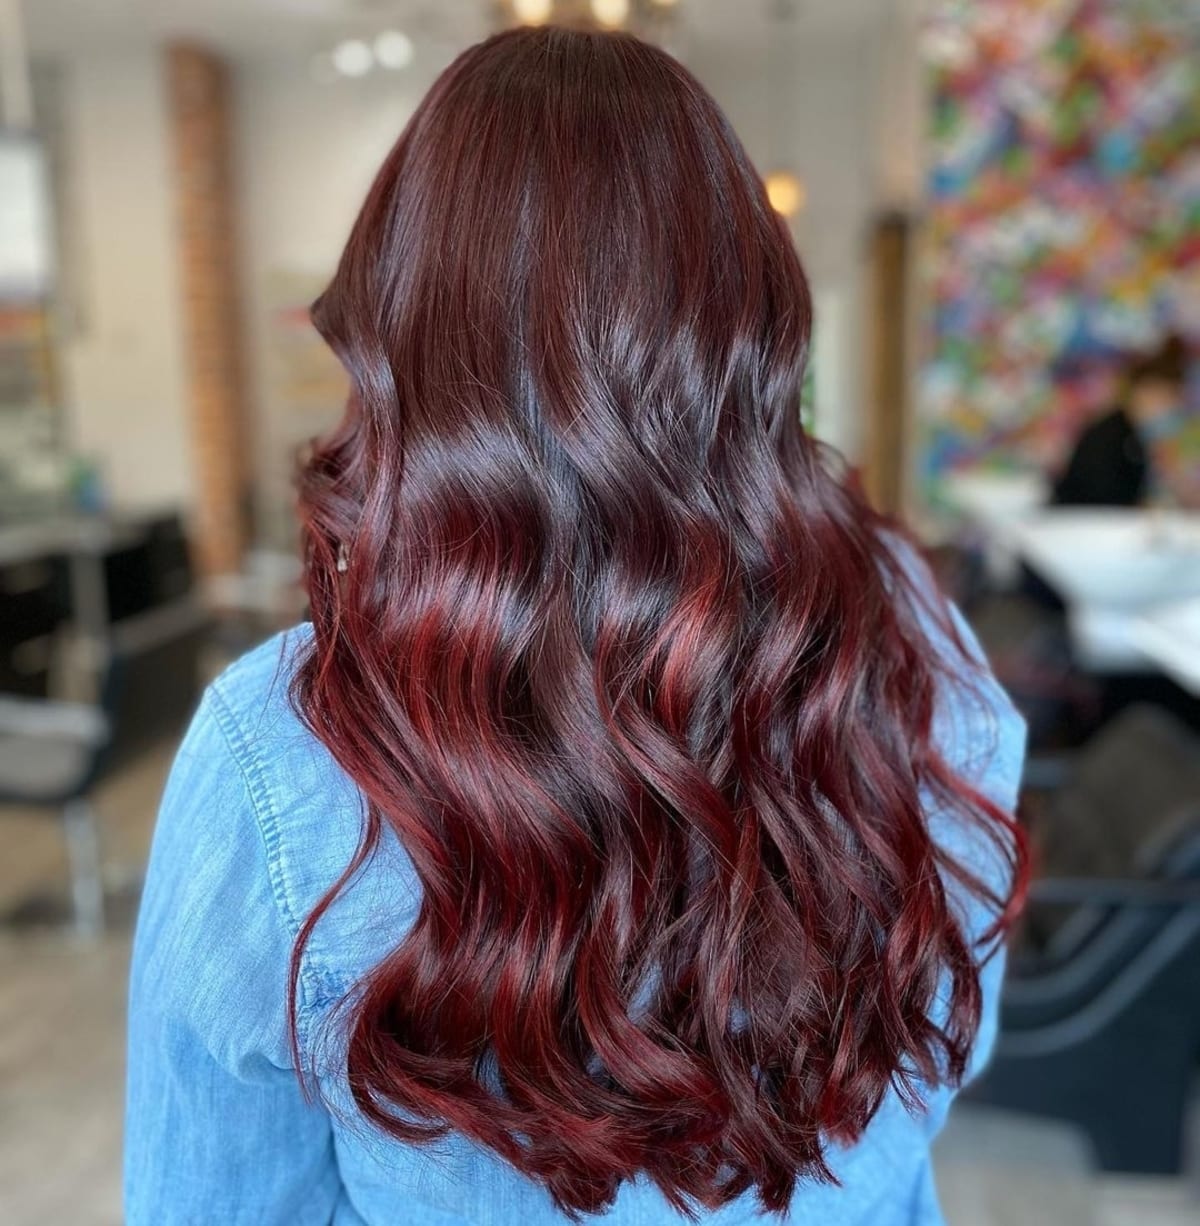 24 Stunning Maroon Hair Colors You Must See